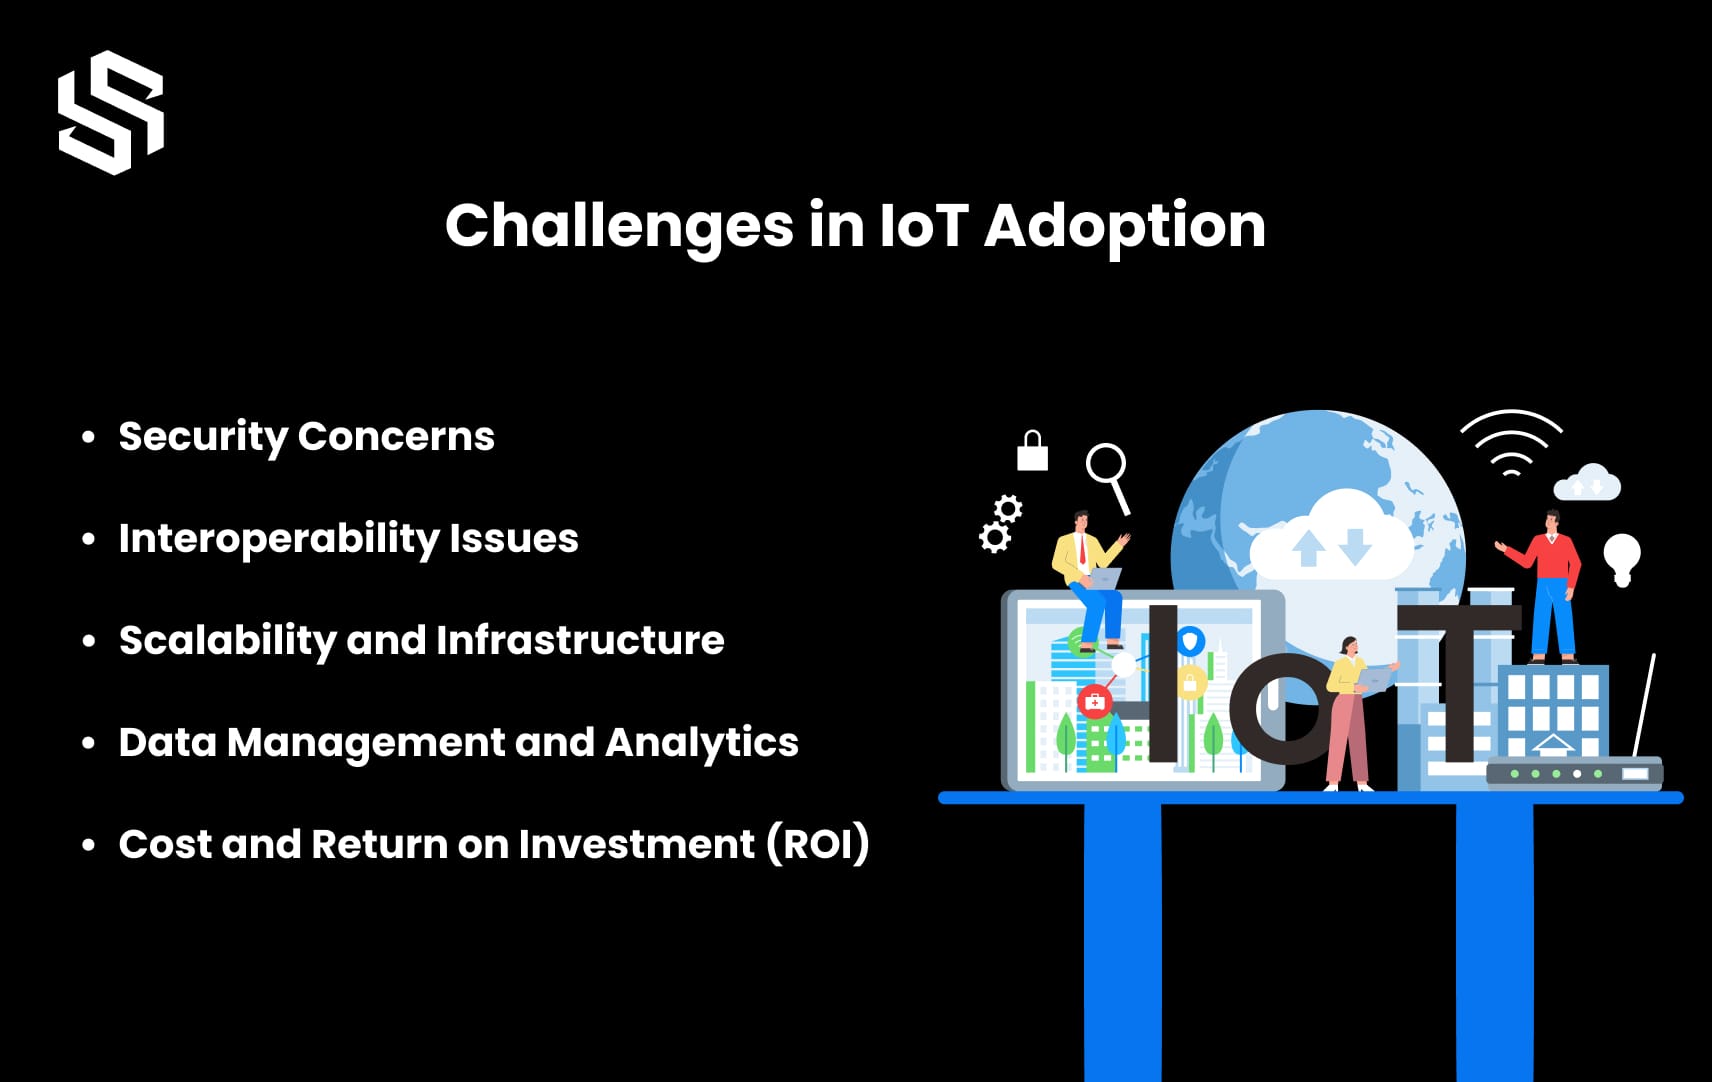 Challenges in IoT Adoption